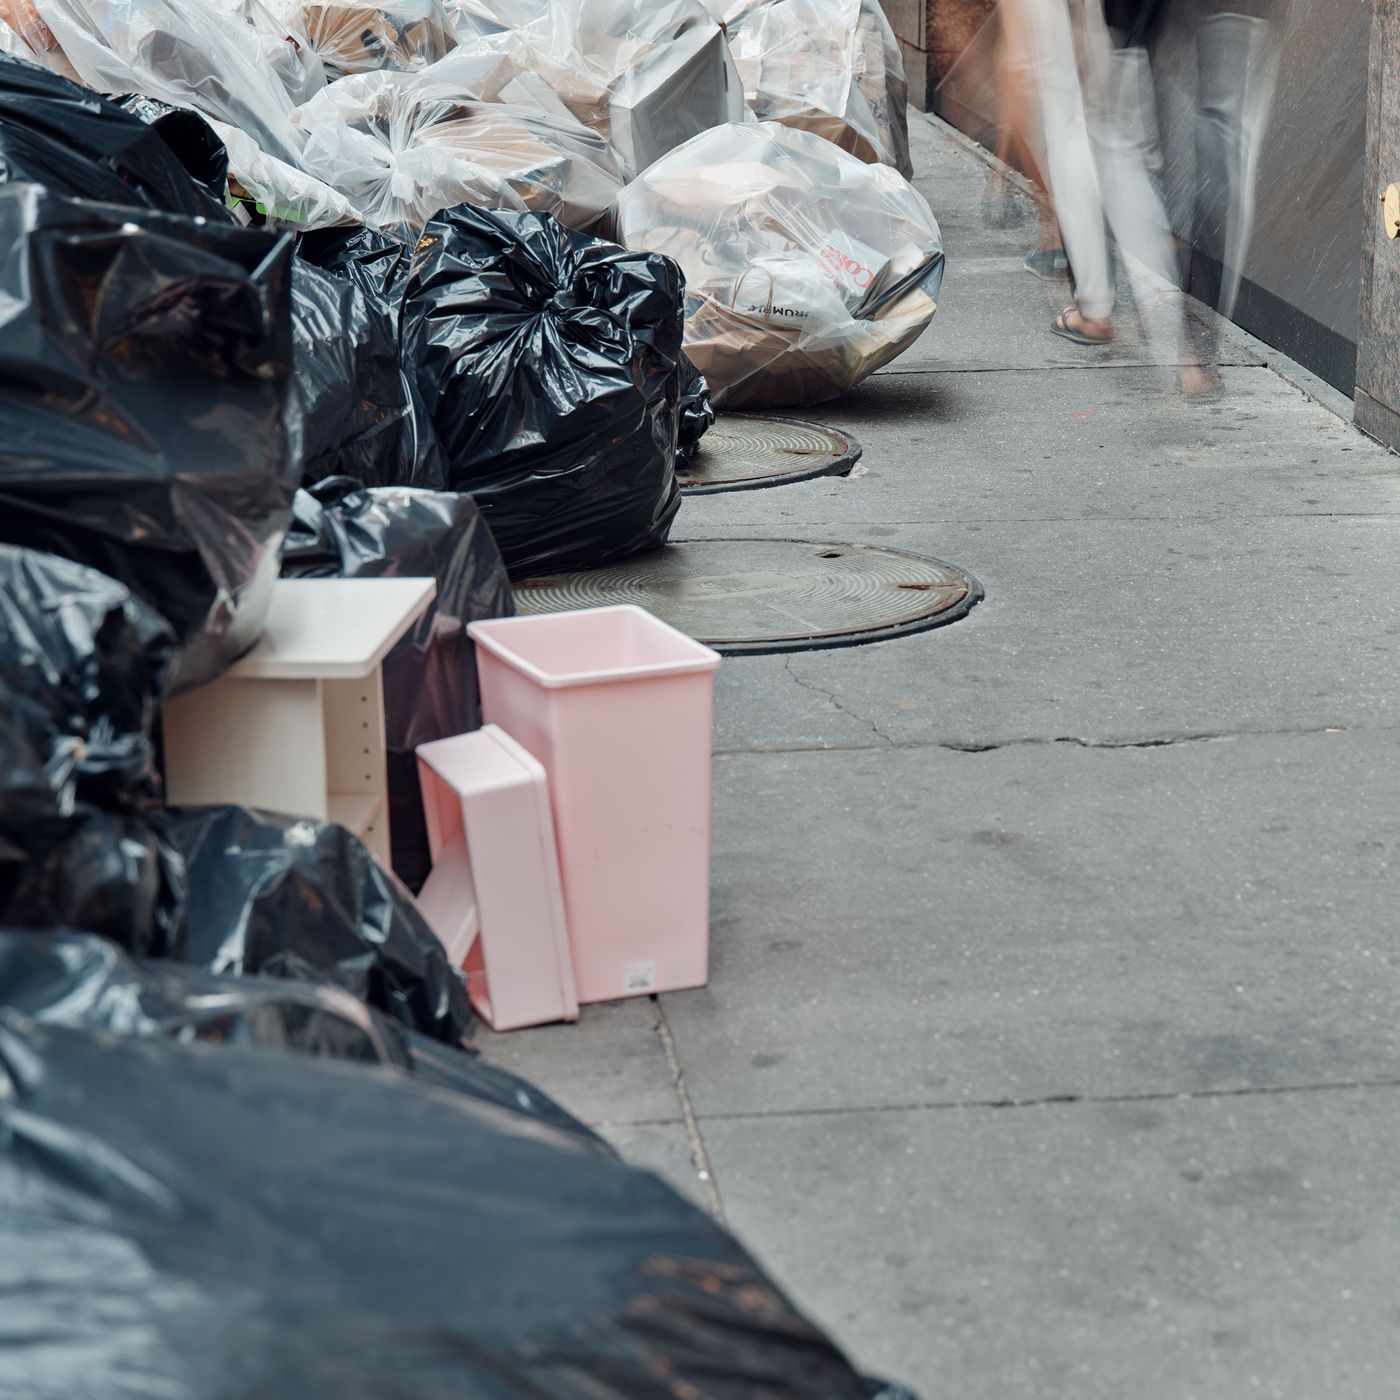 New York's trash problem may be solved with an obvious fix